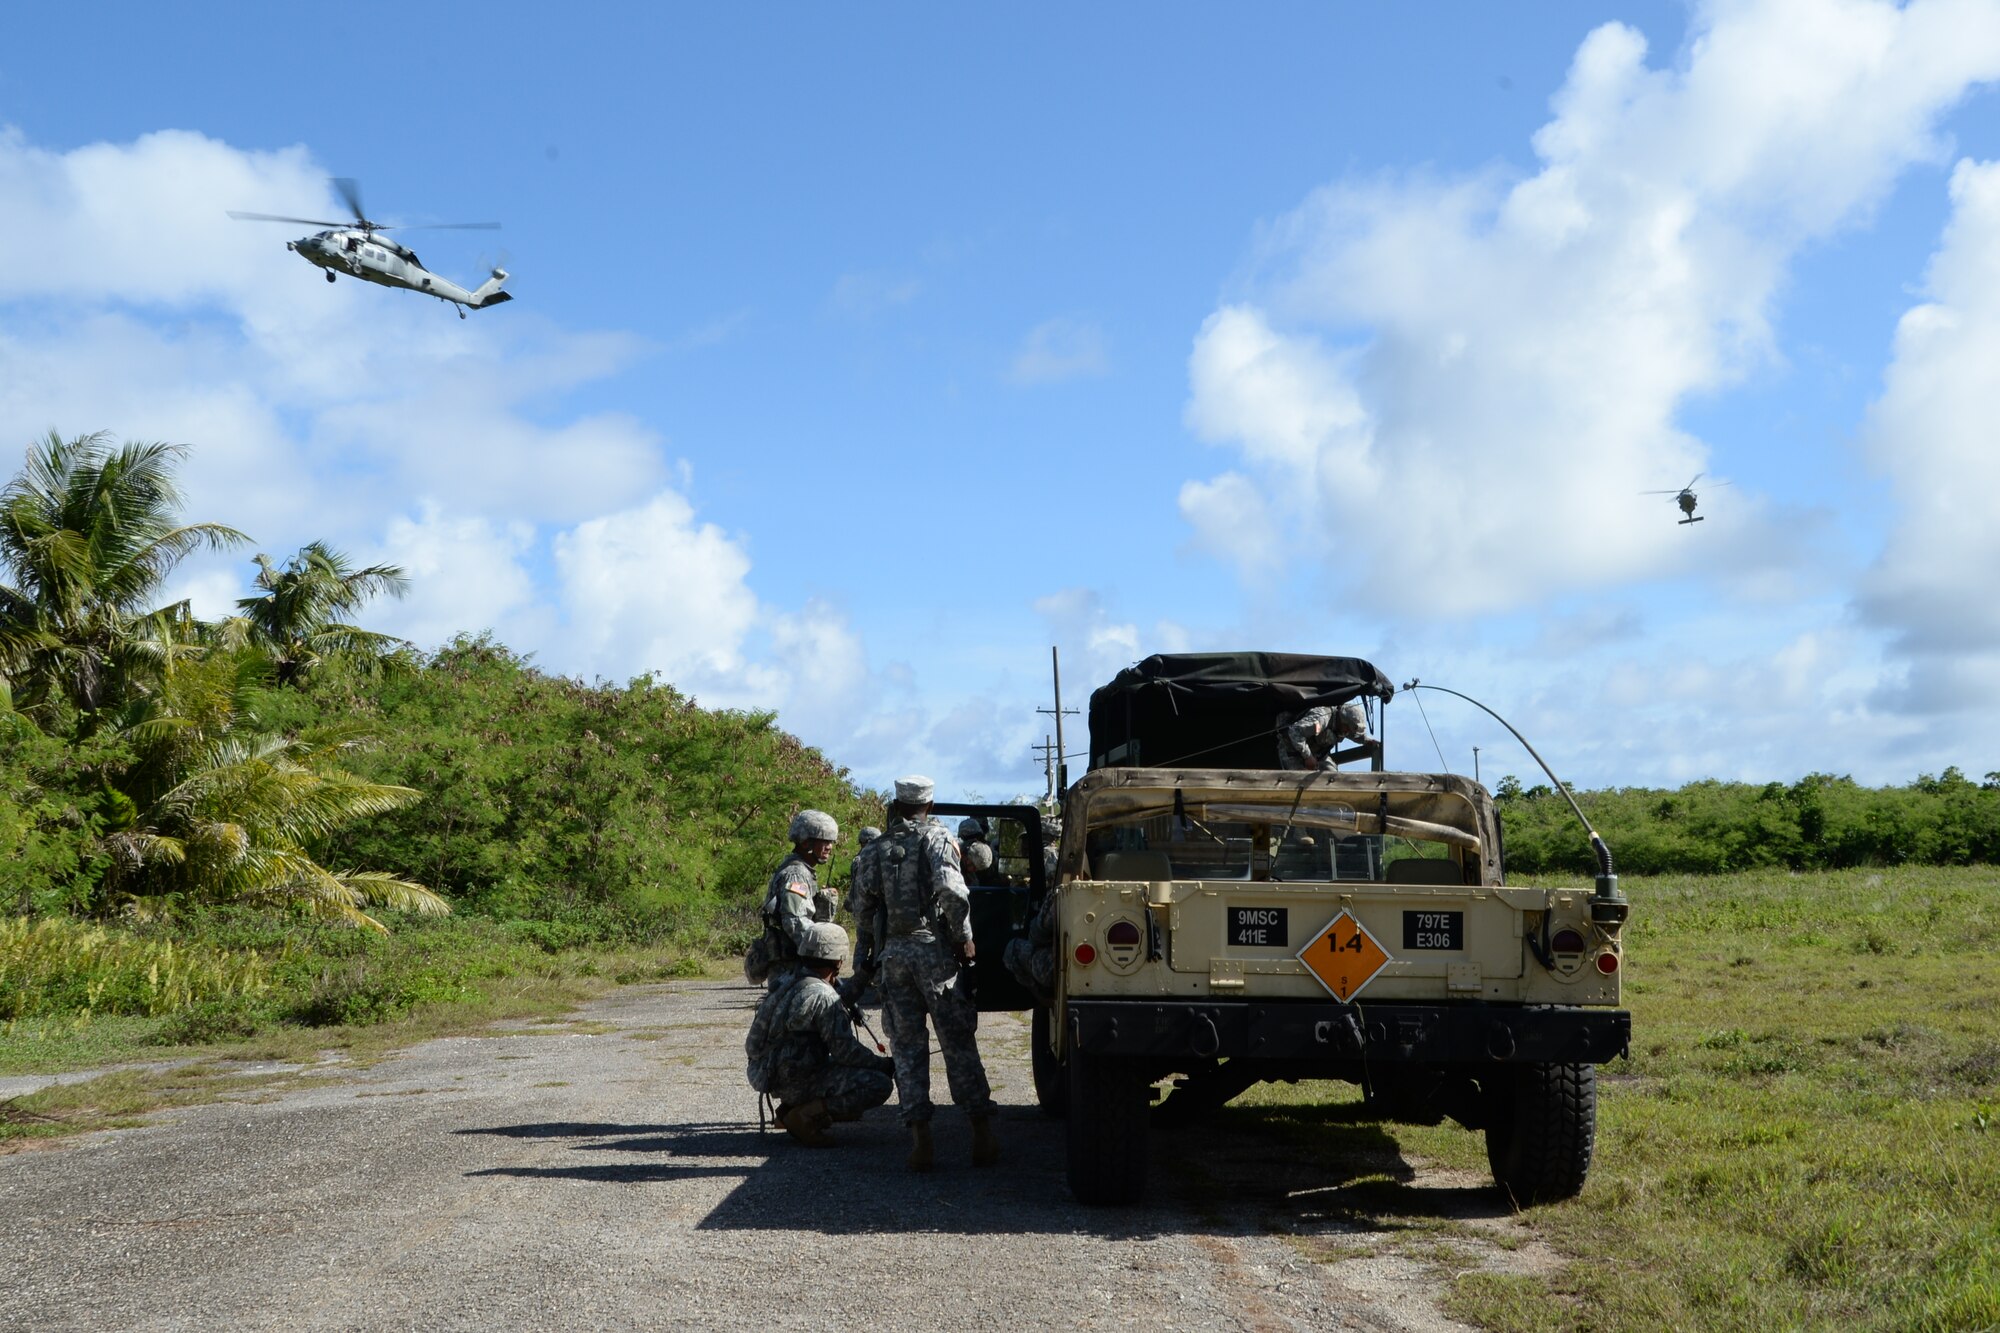 The U.S. Army Reserve 797th Engineer Company (Vertical) prepare for a medical evacuation during a training exercise June 11, 2014, on Andersen South, Guam. The training consisted of classroom instruction, demonstrations and scenario-based training conducted alongside members of the U.S.  Navy Helicopter Sea Combat Squadron 25 based at Andersen Air Force Base, Guam. (U.S. Air Force photo by Airman 1st Class Amanda Morris/Released)